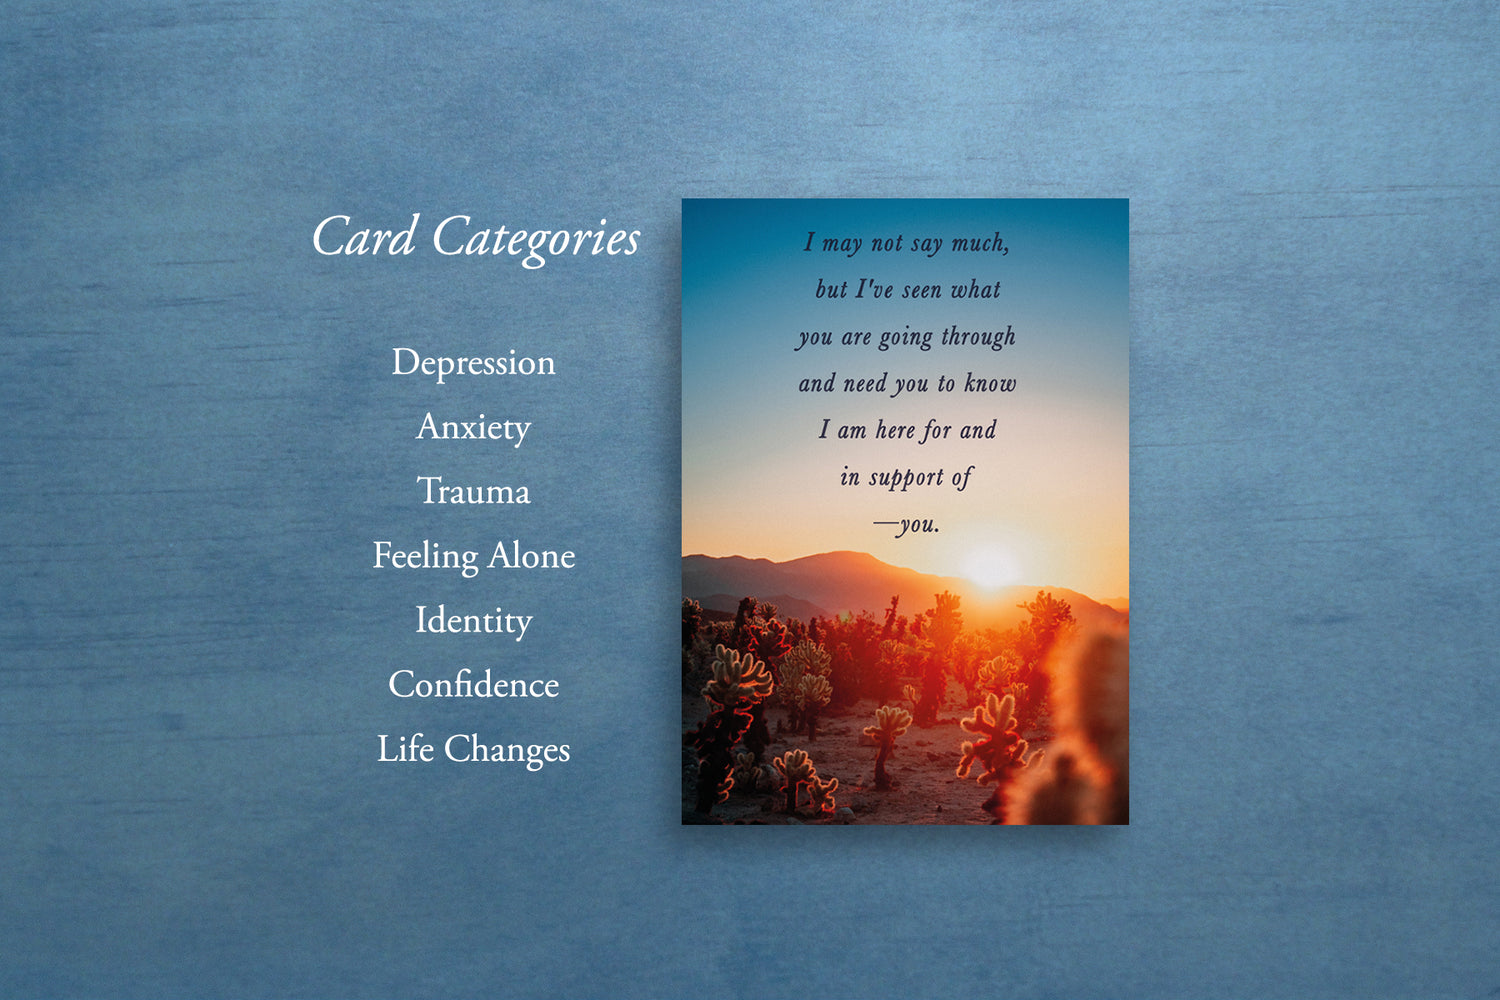 Mental Health Card categories that include depression, anxiety, trauma, feeling isolated/alone, identity, confidence, and life changes.